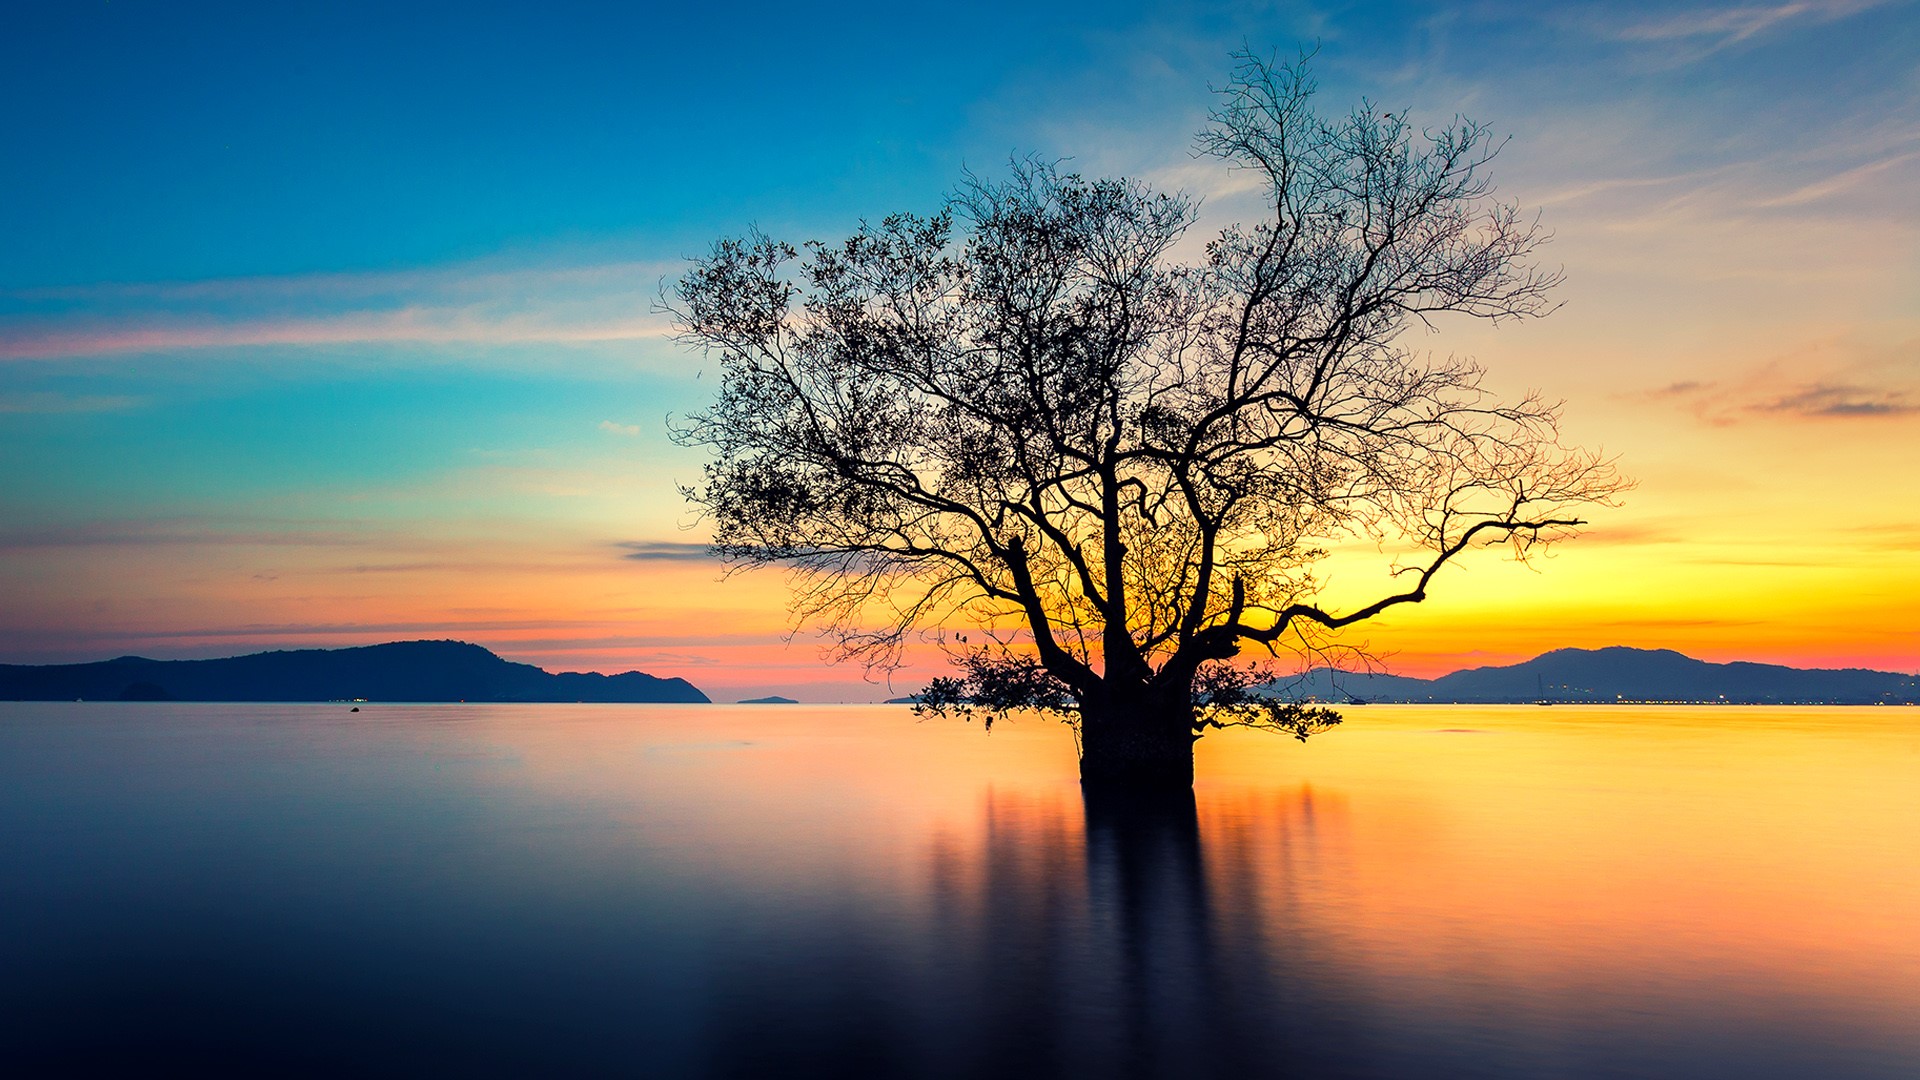 General 1920x1080 nature landscape trees lake mountains clouds sky sunset water branch lights Thailand dusk